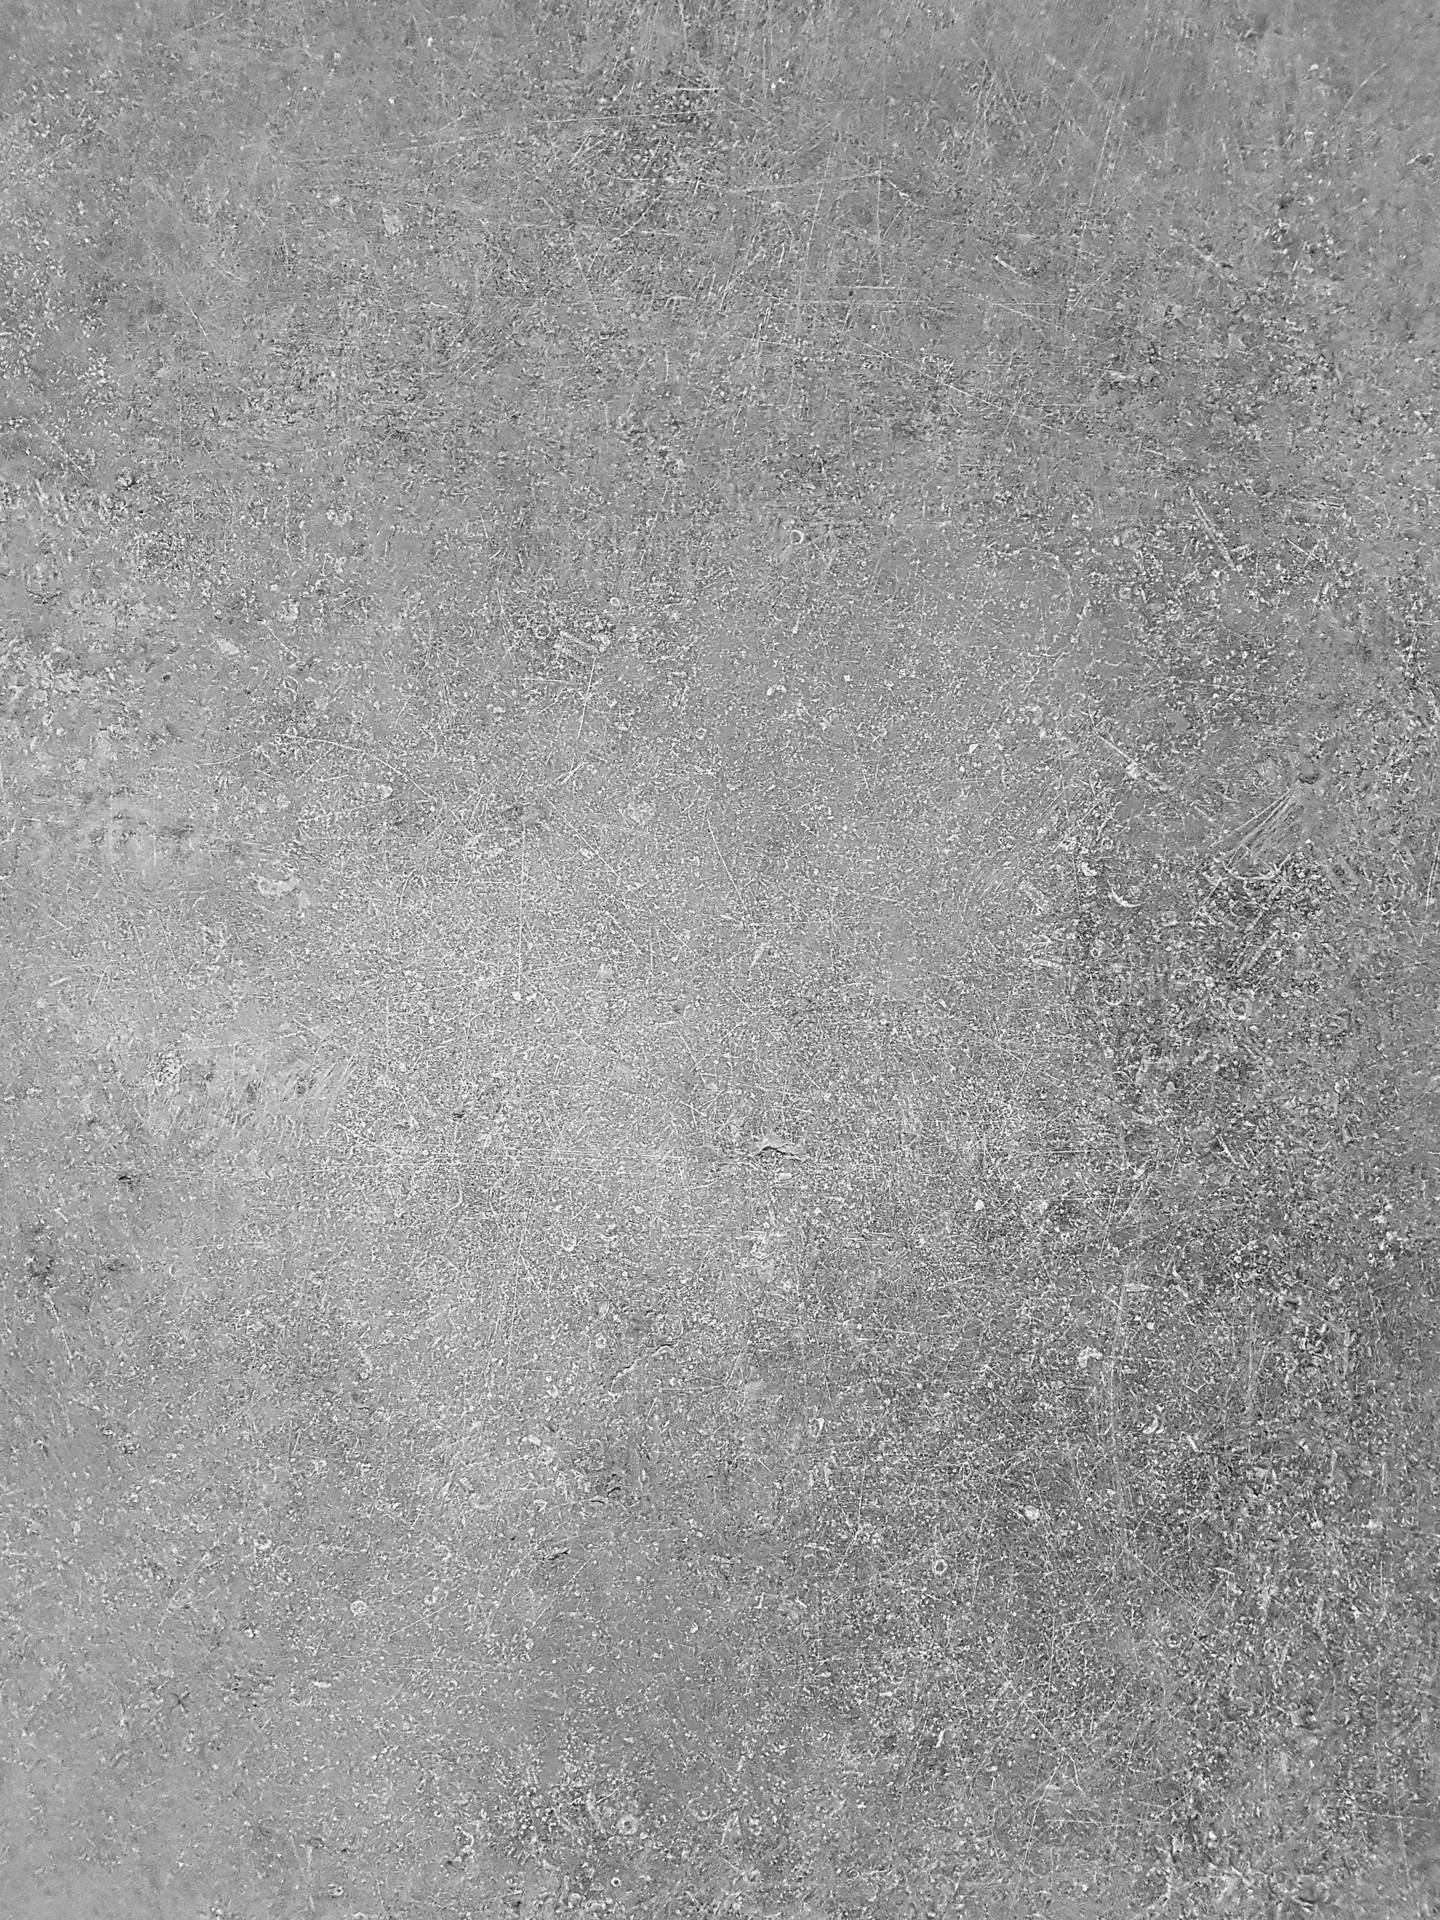 3024X4032 Grey Wallpaper and Background